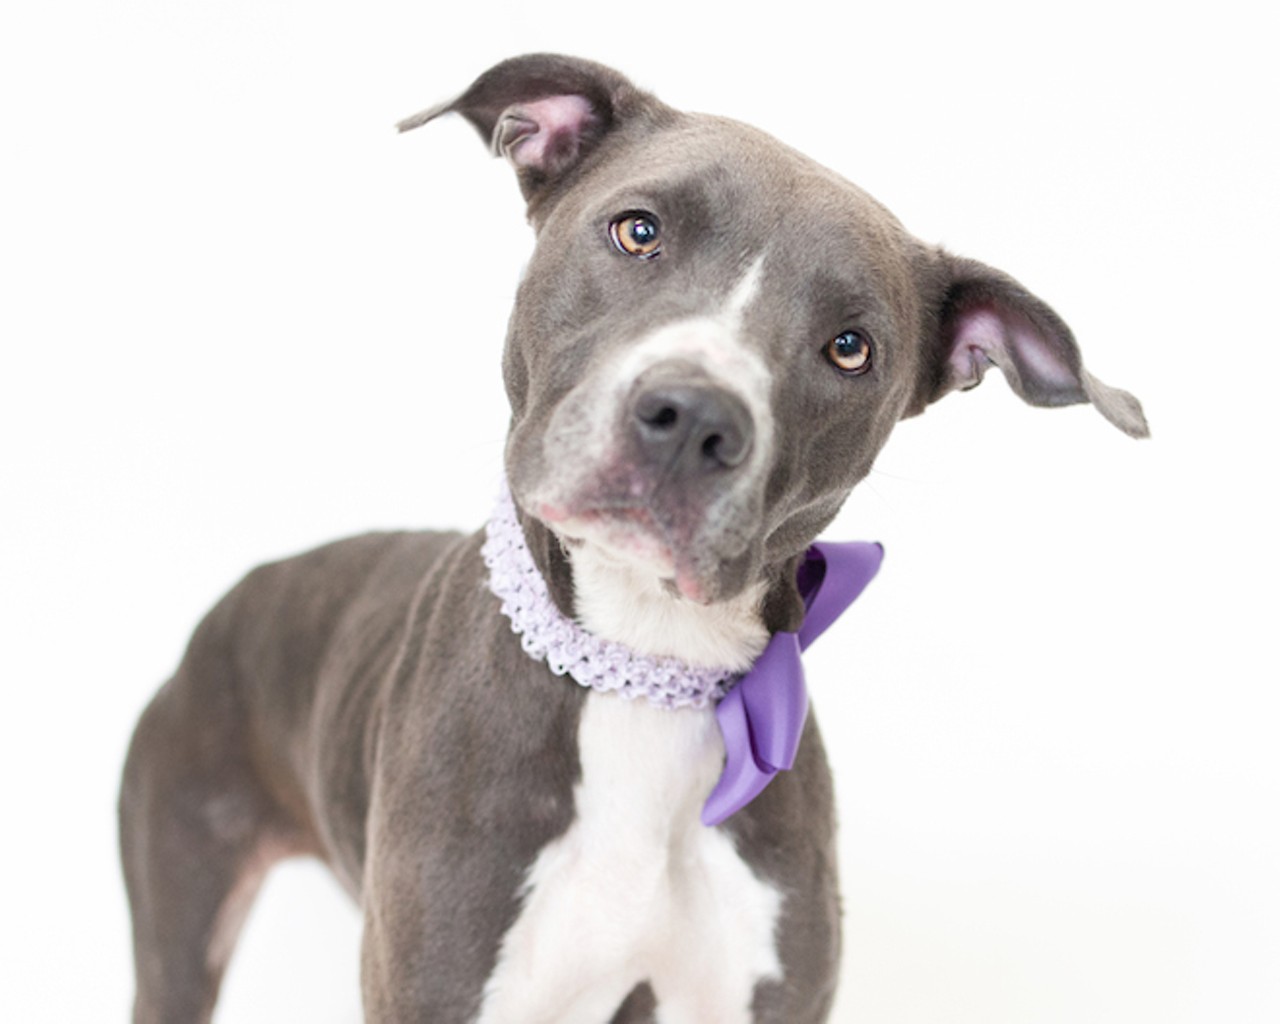 22 darling dogs up for adoption at OCAS who could be your new best friend